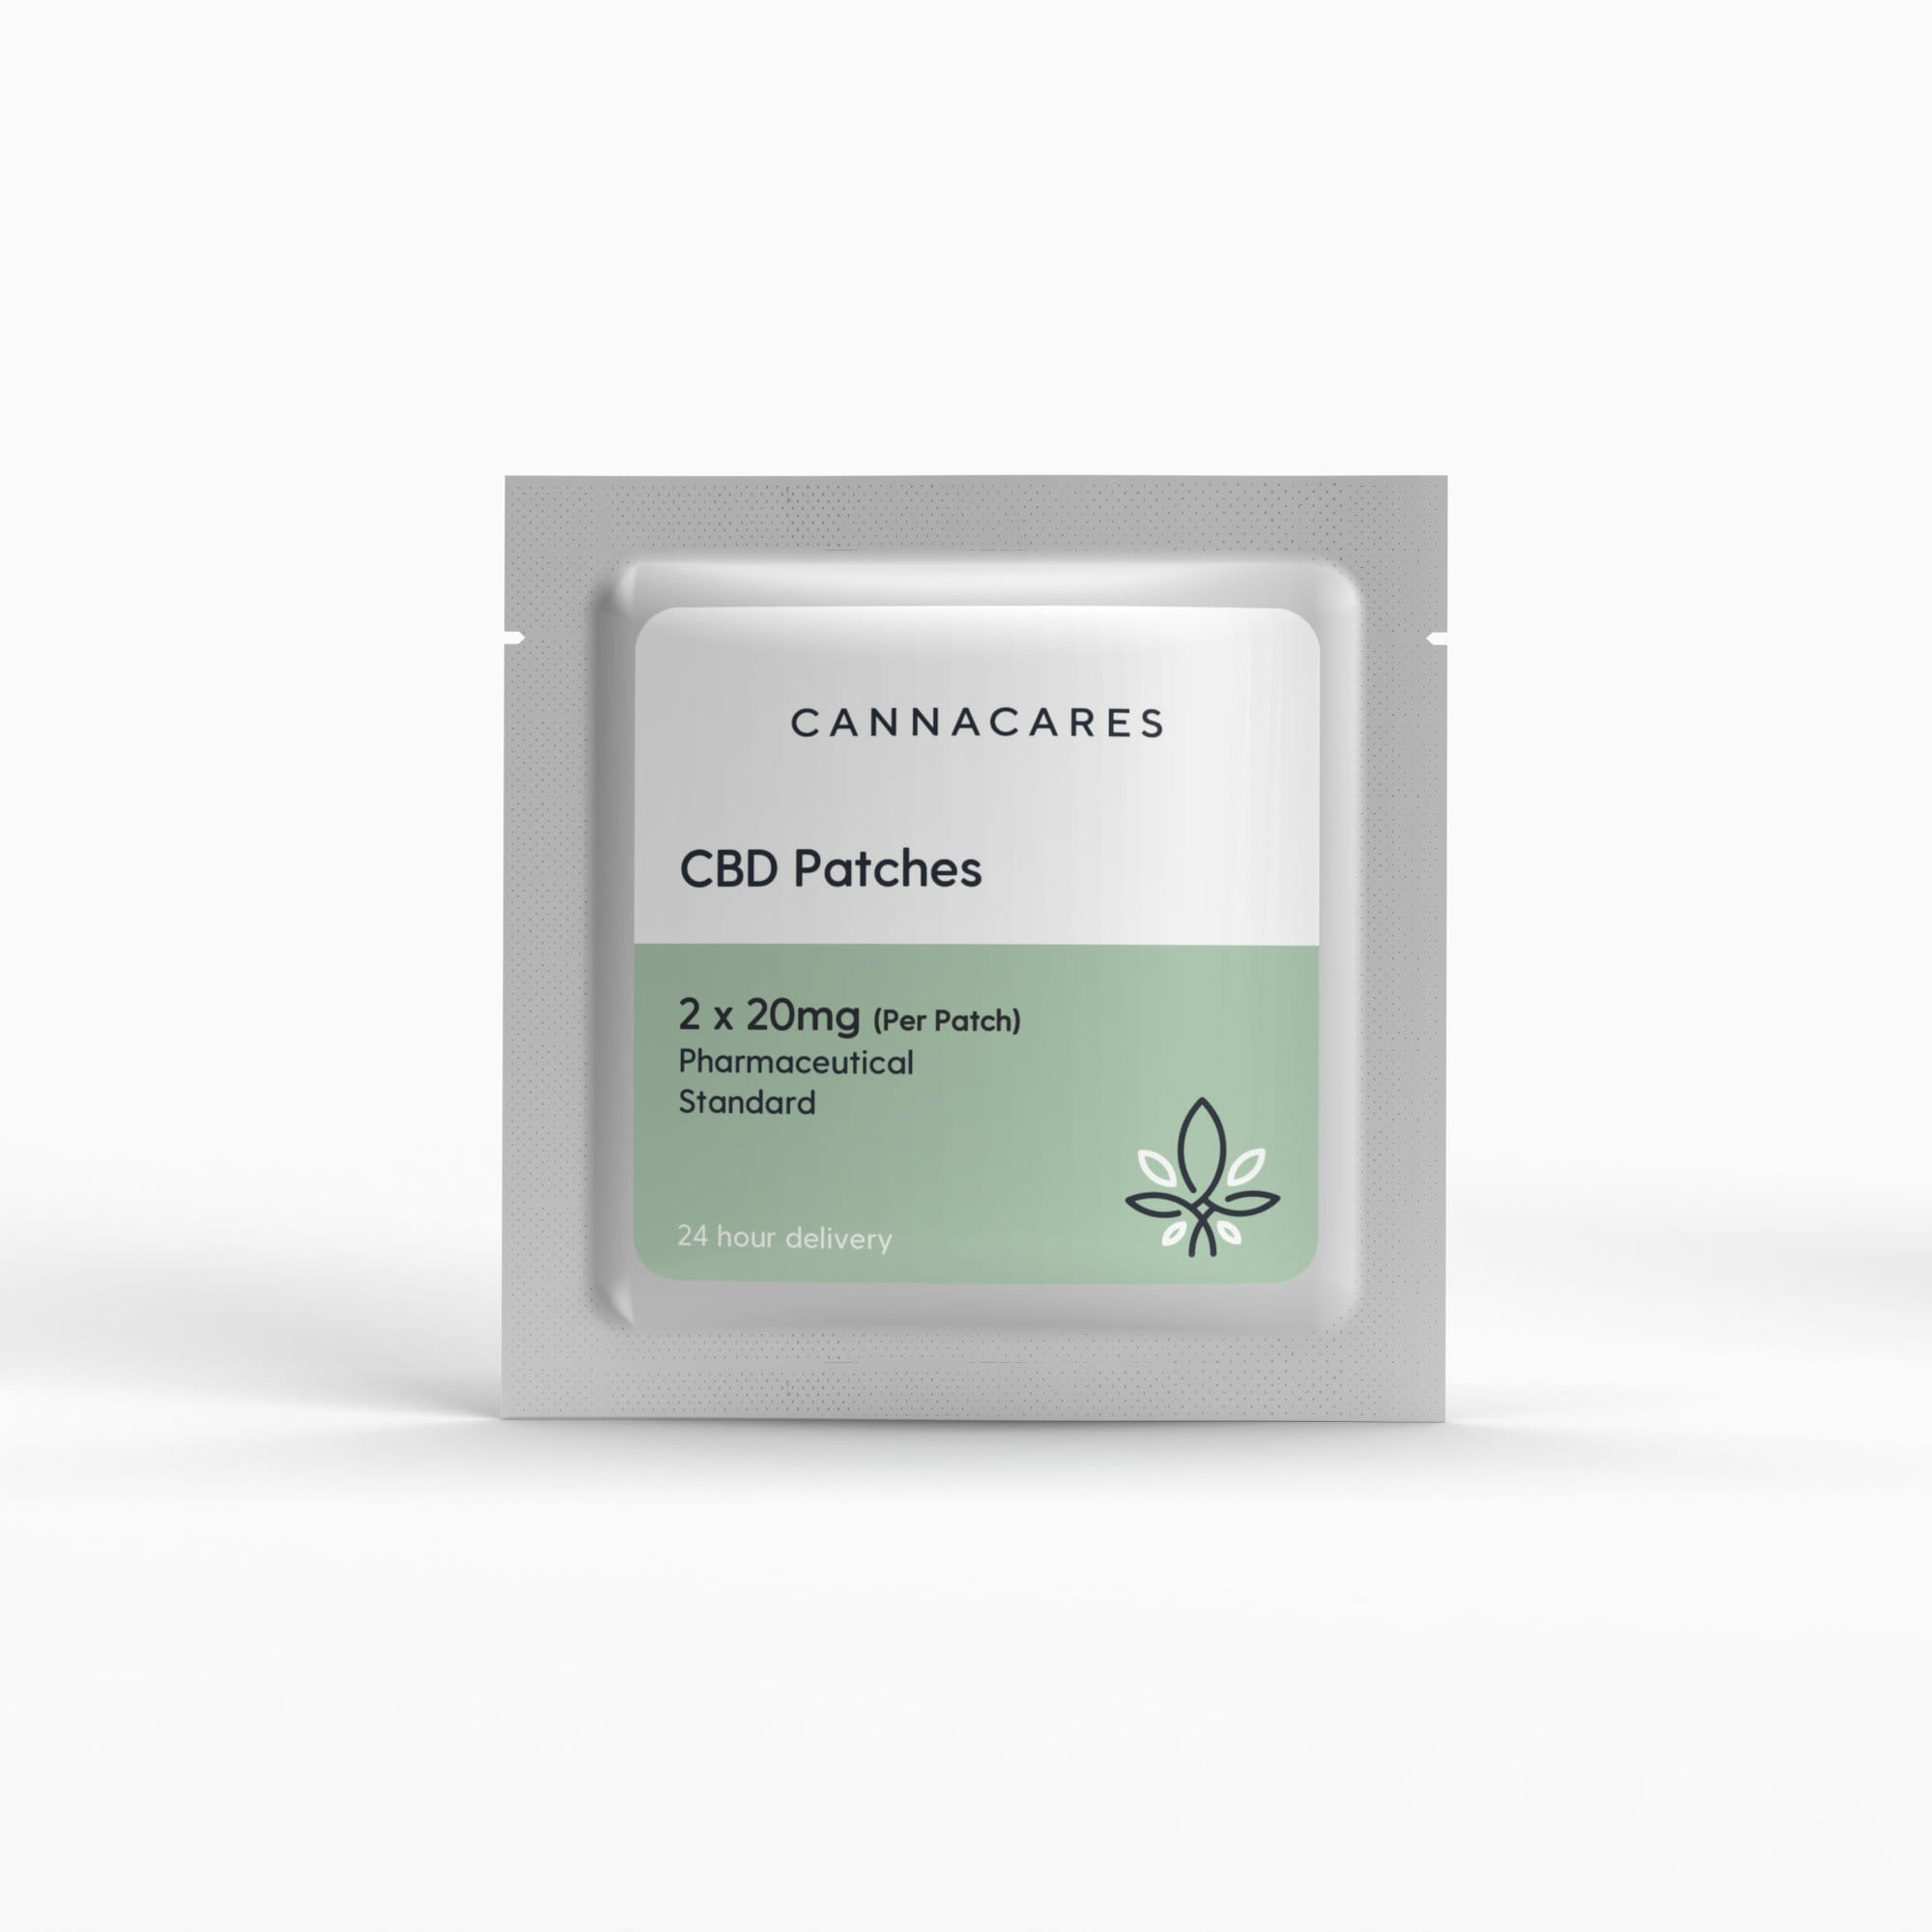 Cannacares patches 2 x 20mg CBD Patches (1pk)